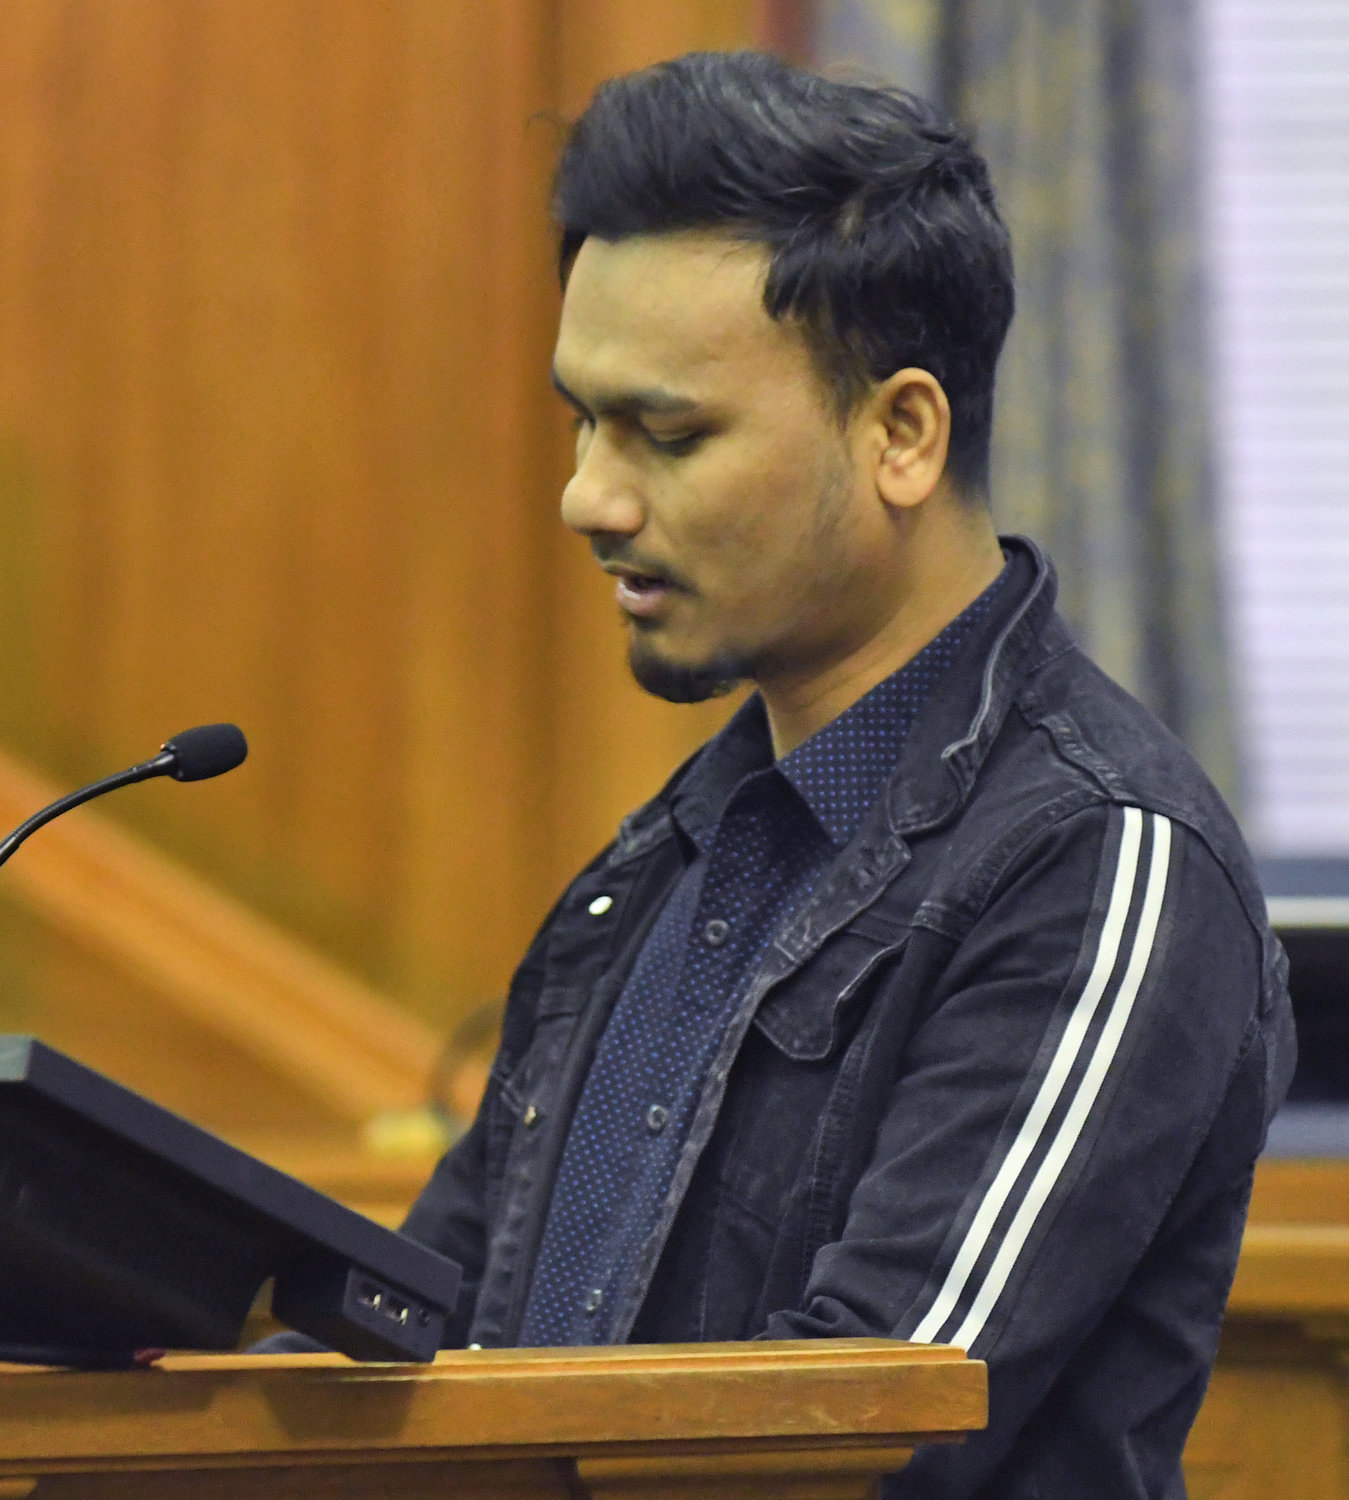 New citizen Ali Bin Mohamad Sekali formerly of Burma made comments to his peers from the new citizen perspective Thursday during the Naturalization Cerremony at the Alexander Pirnie Federal Courthouse in Utica.